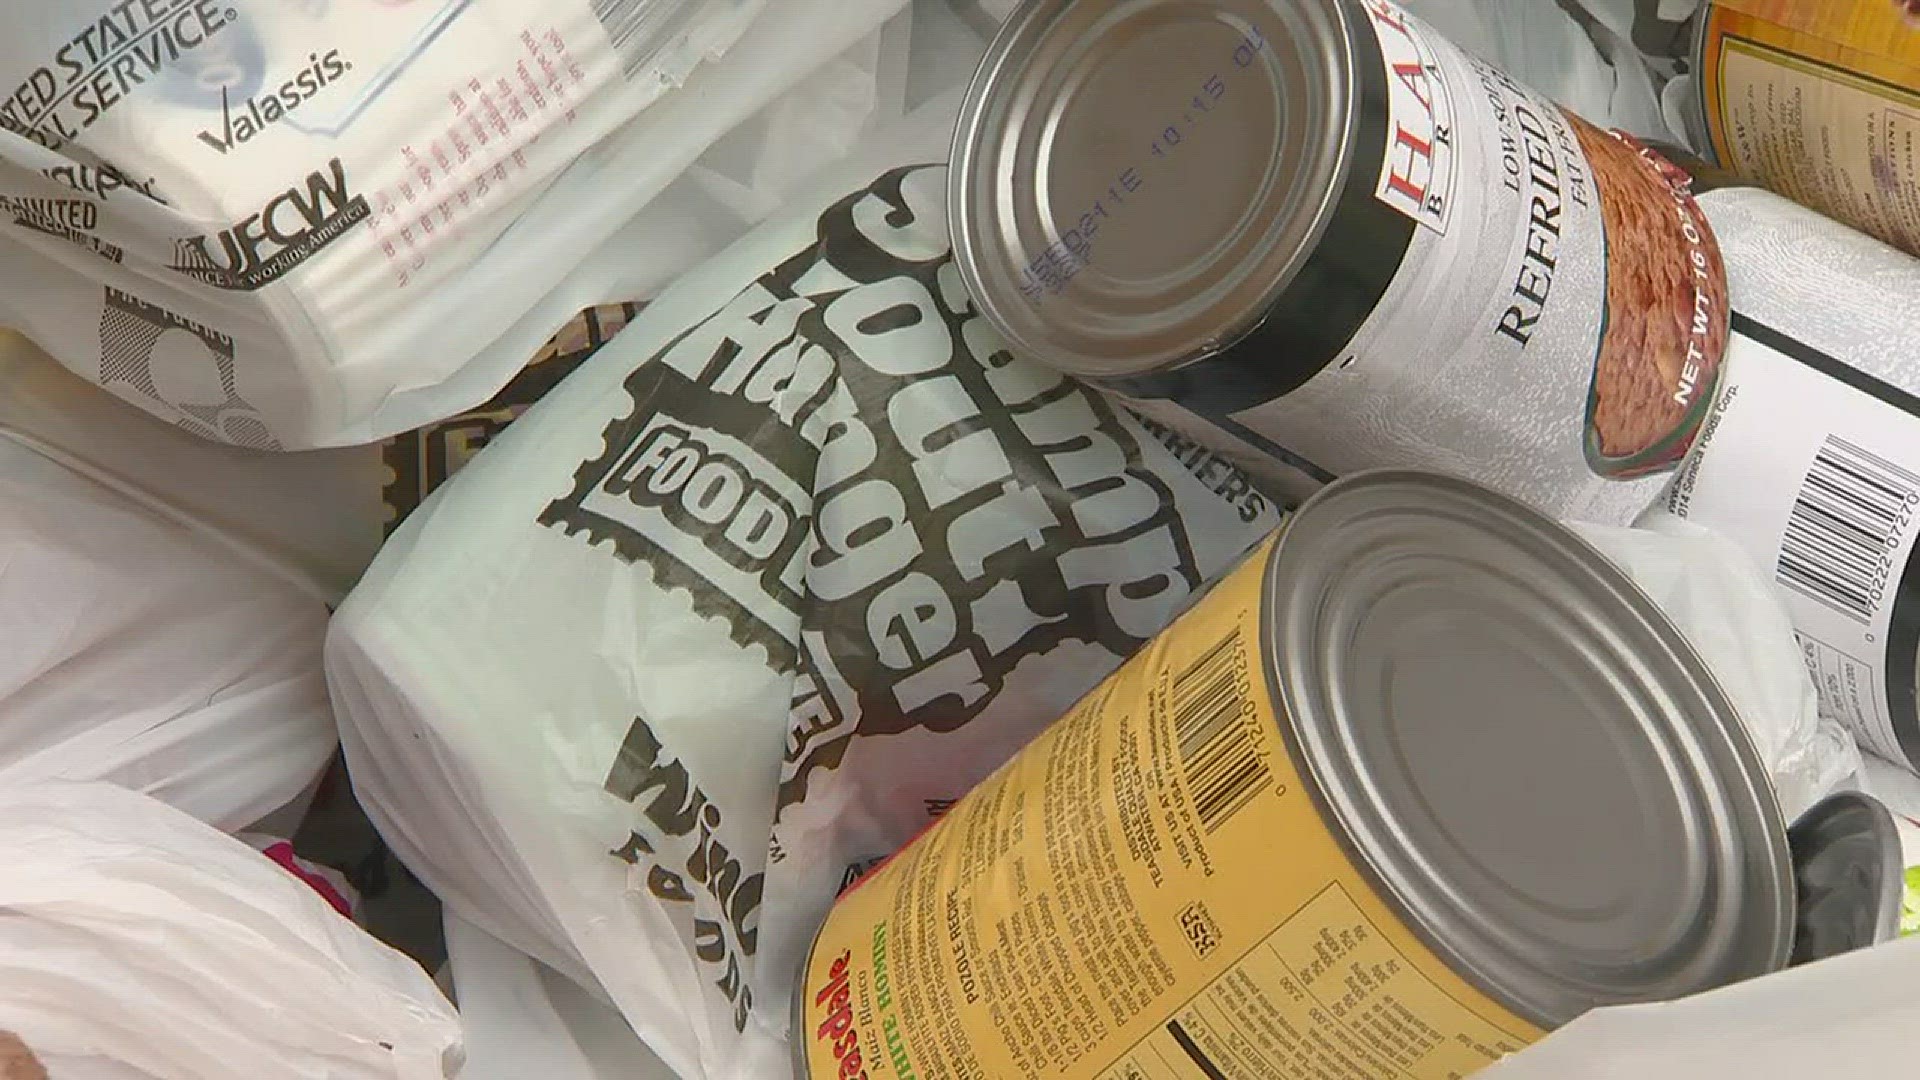 Postal carriers collect food on that day and donate it to the Idaho Foodbank.